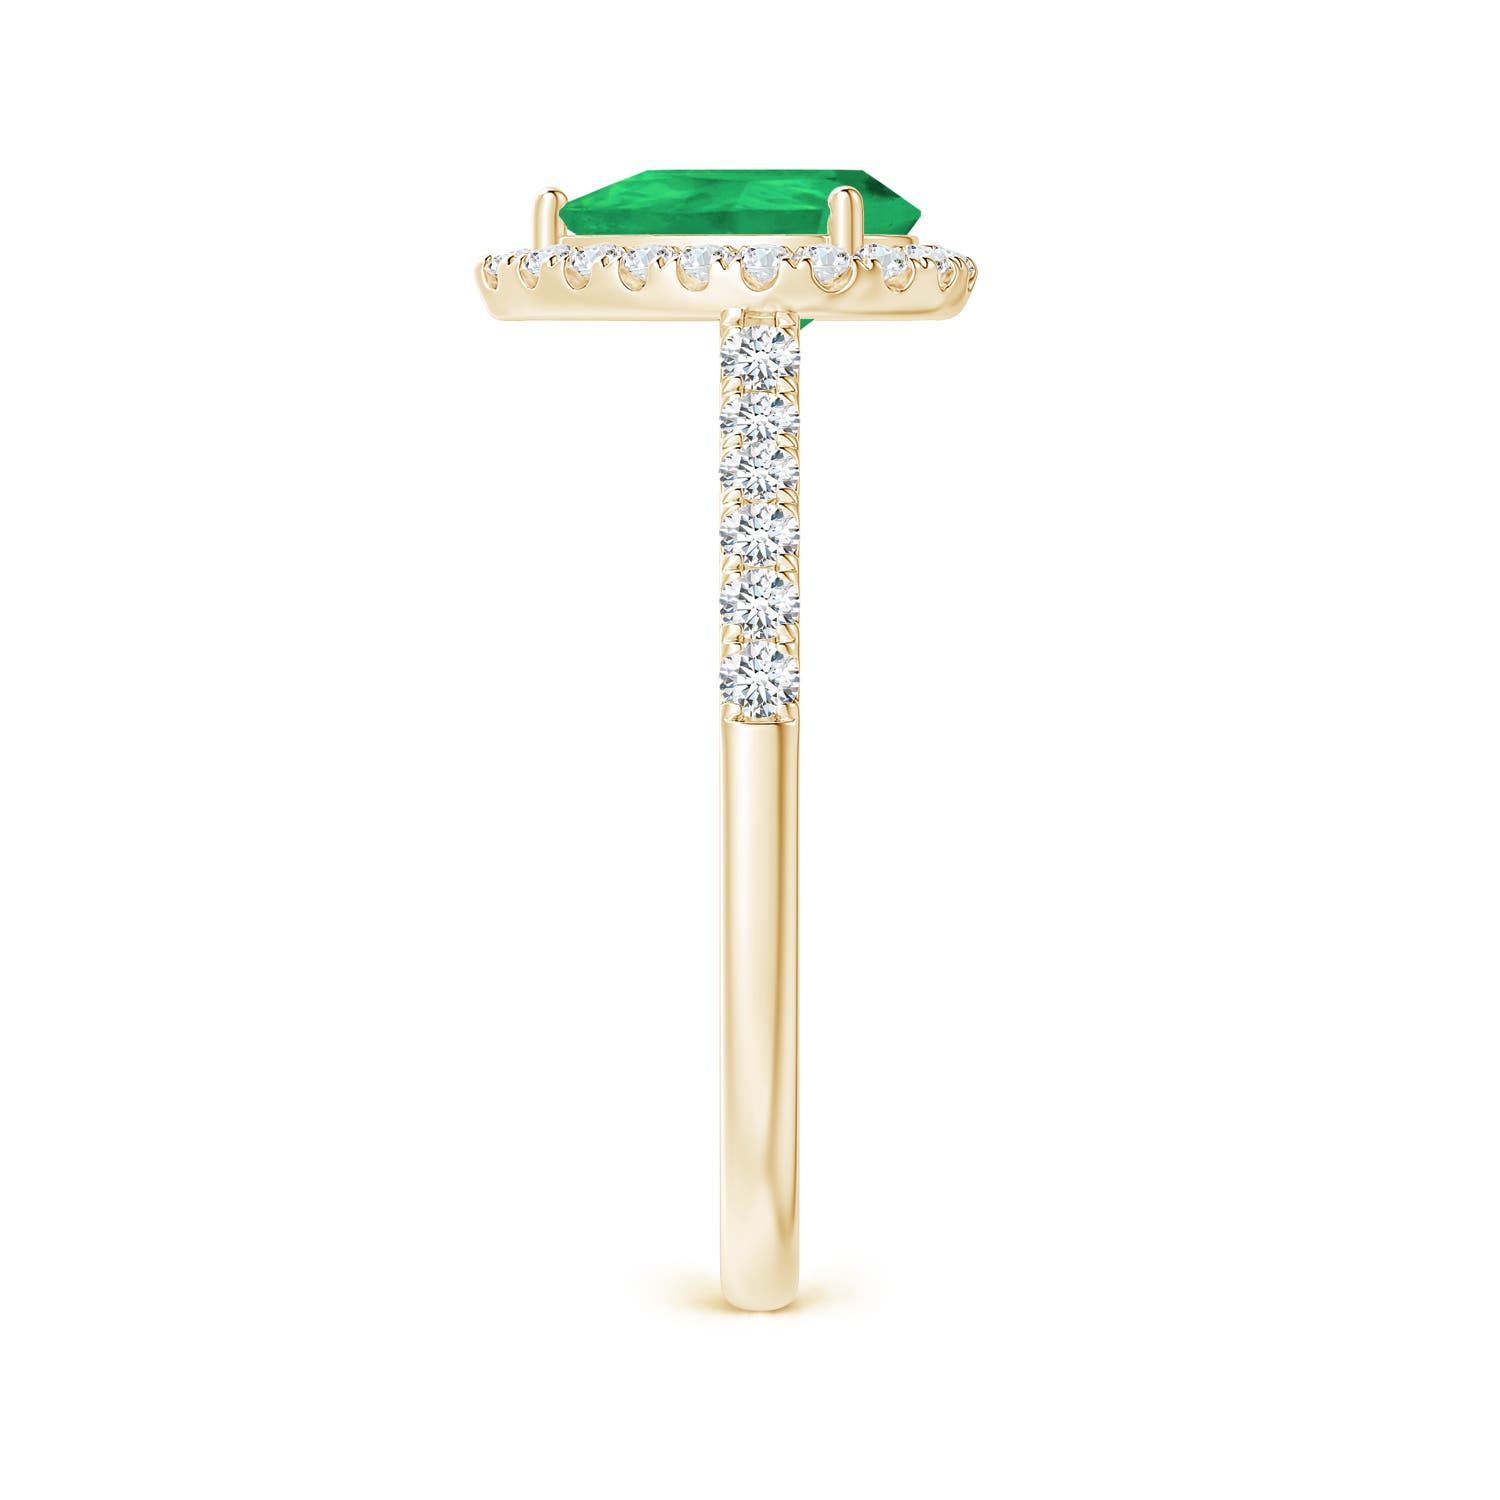 A - Emerald / 1.32 CT / 14 KT Yellow Gold